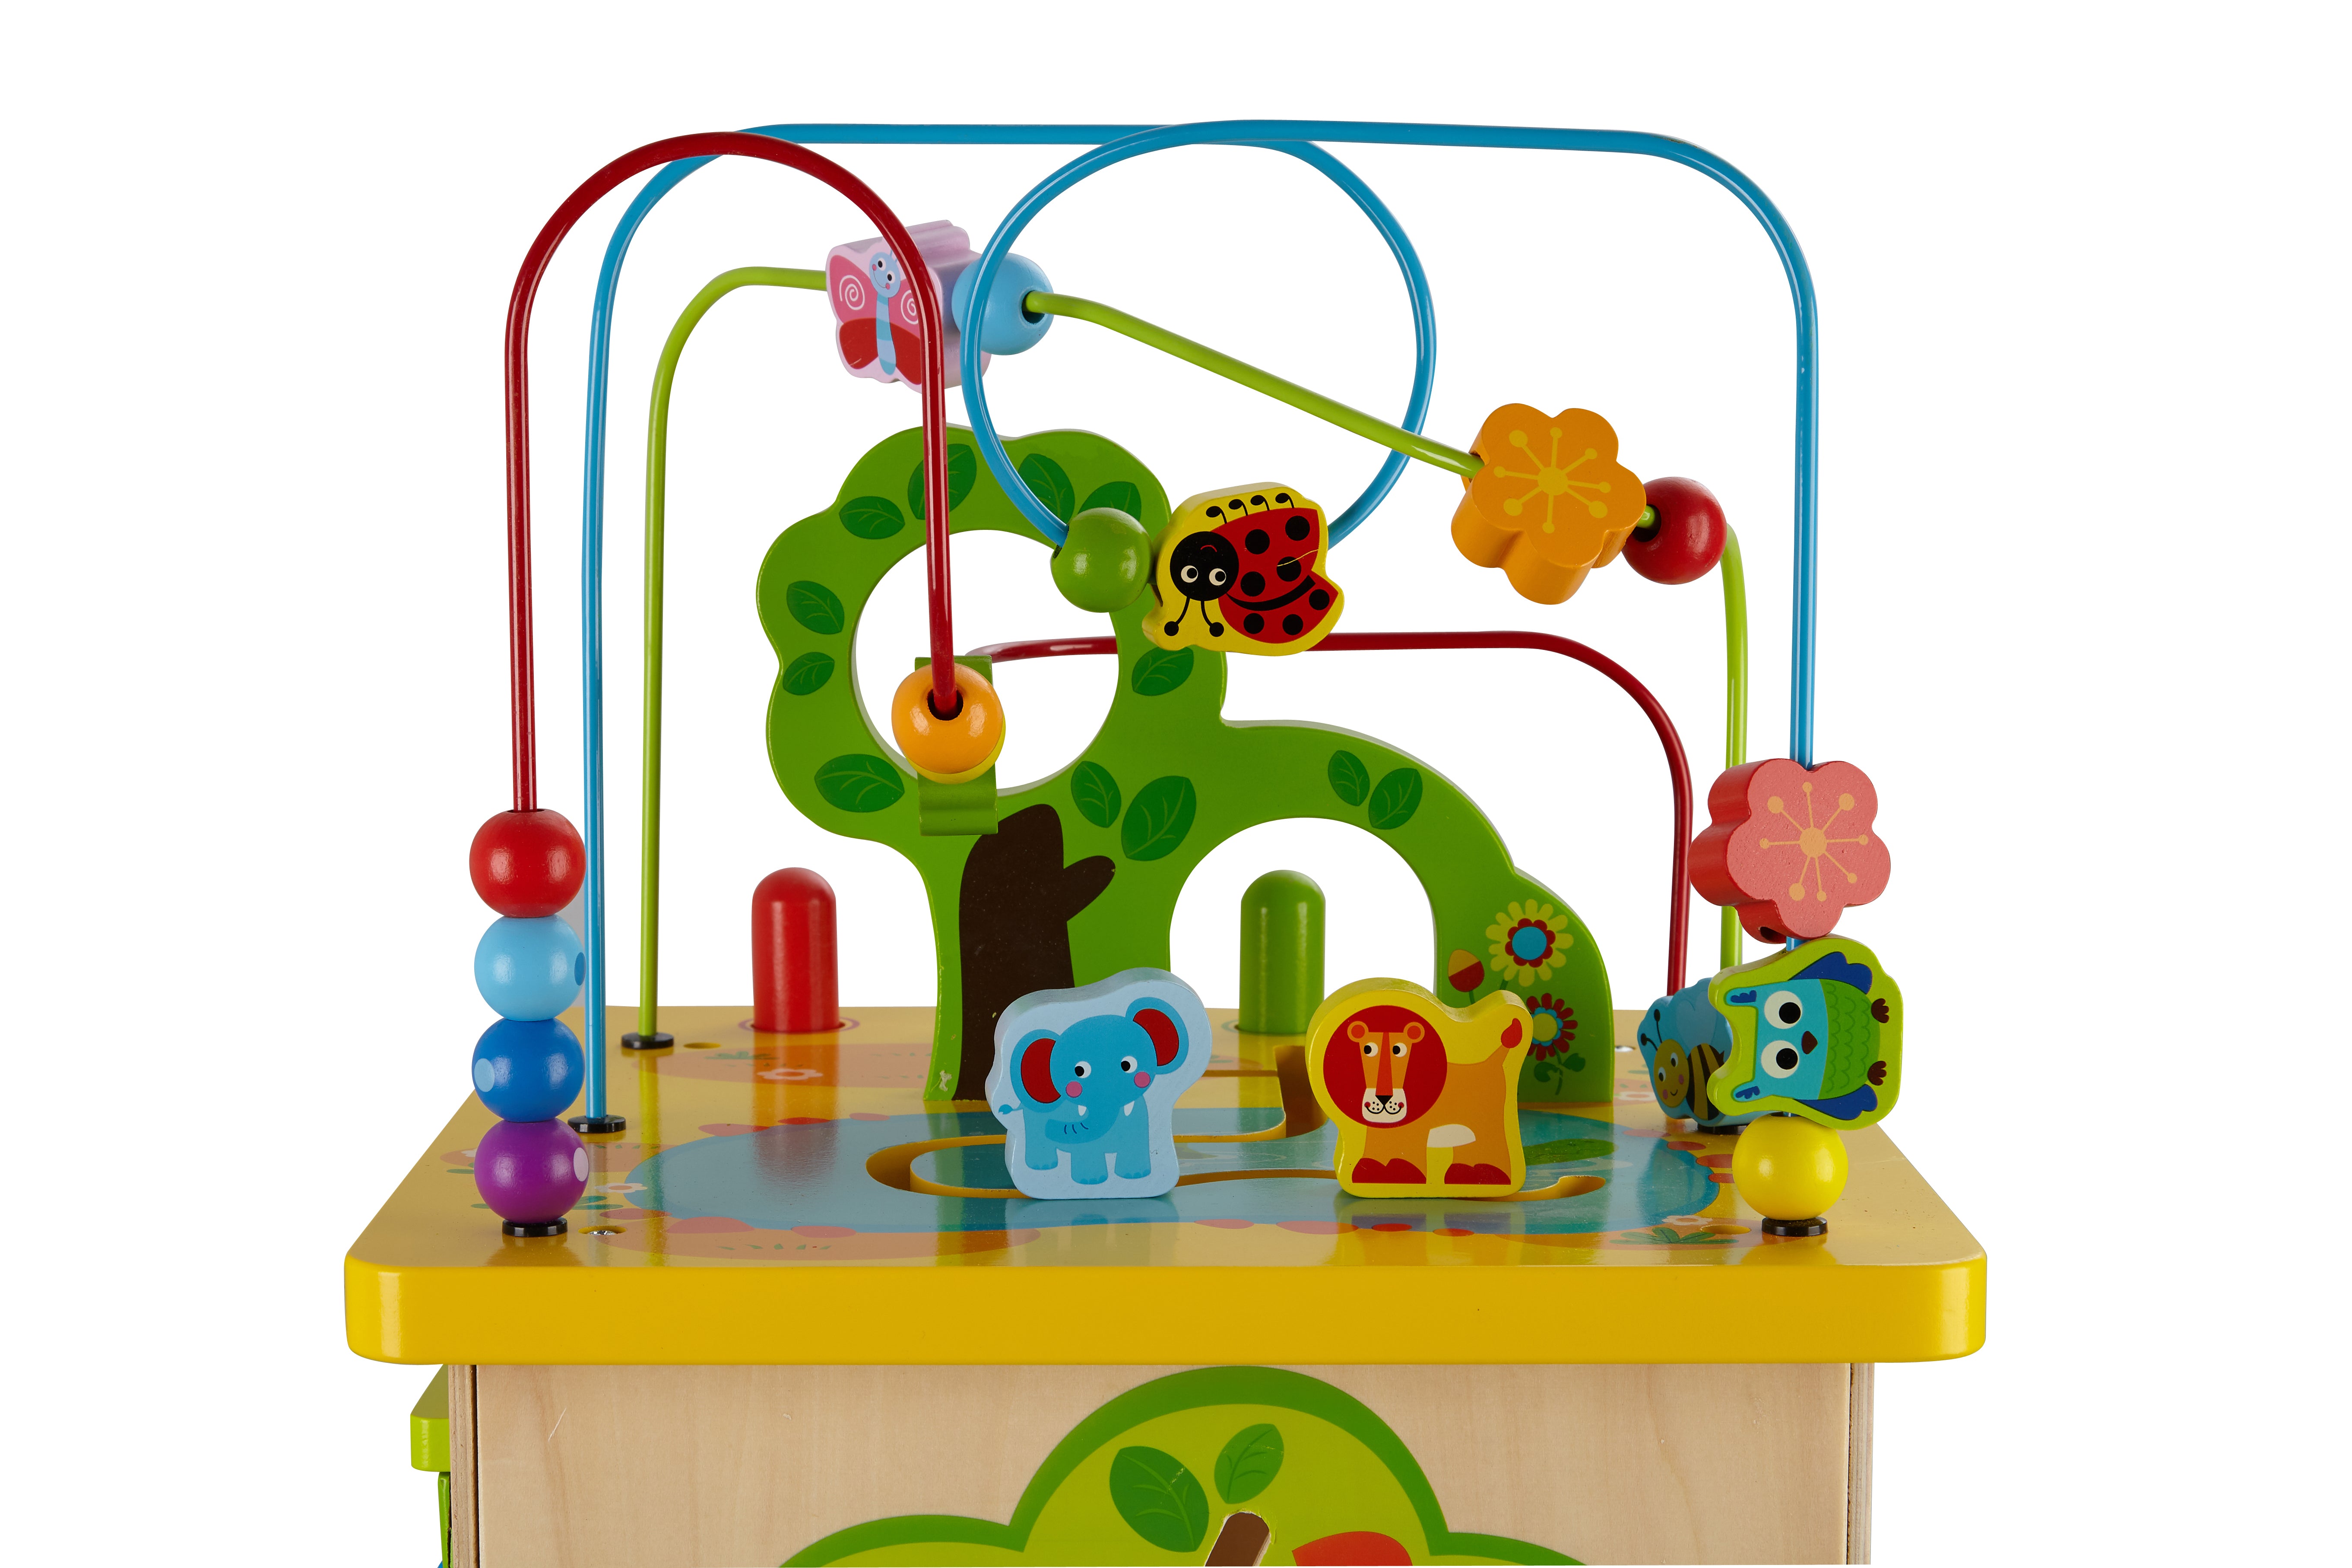 Toysters Wooden Activity Cube for Toddlers